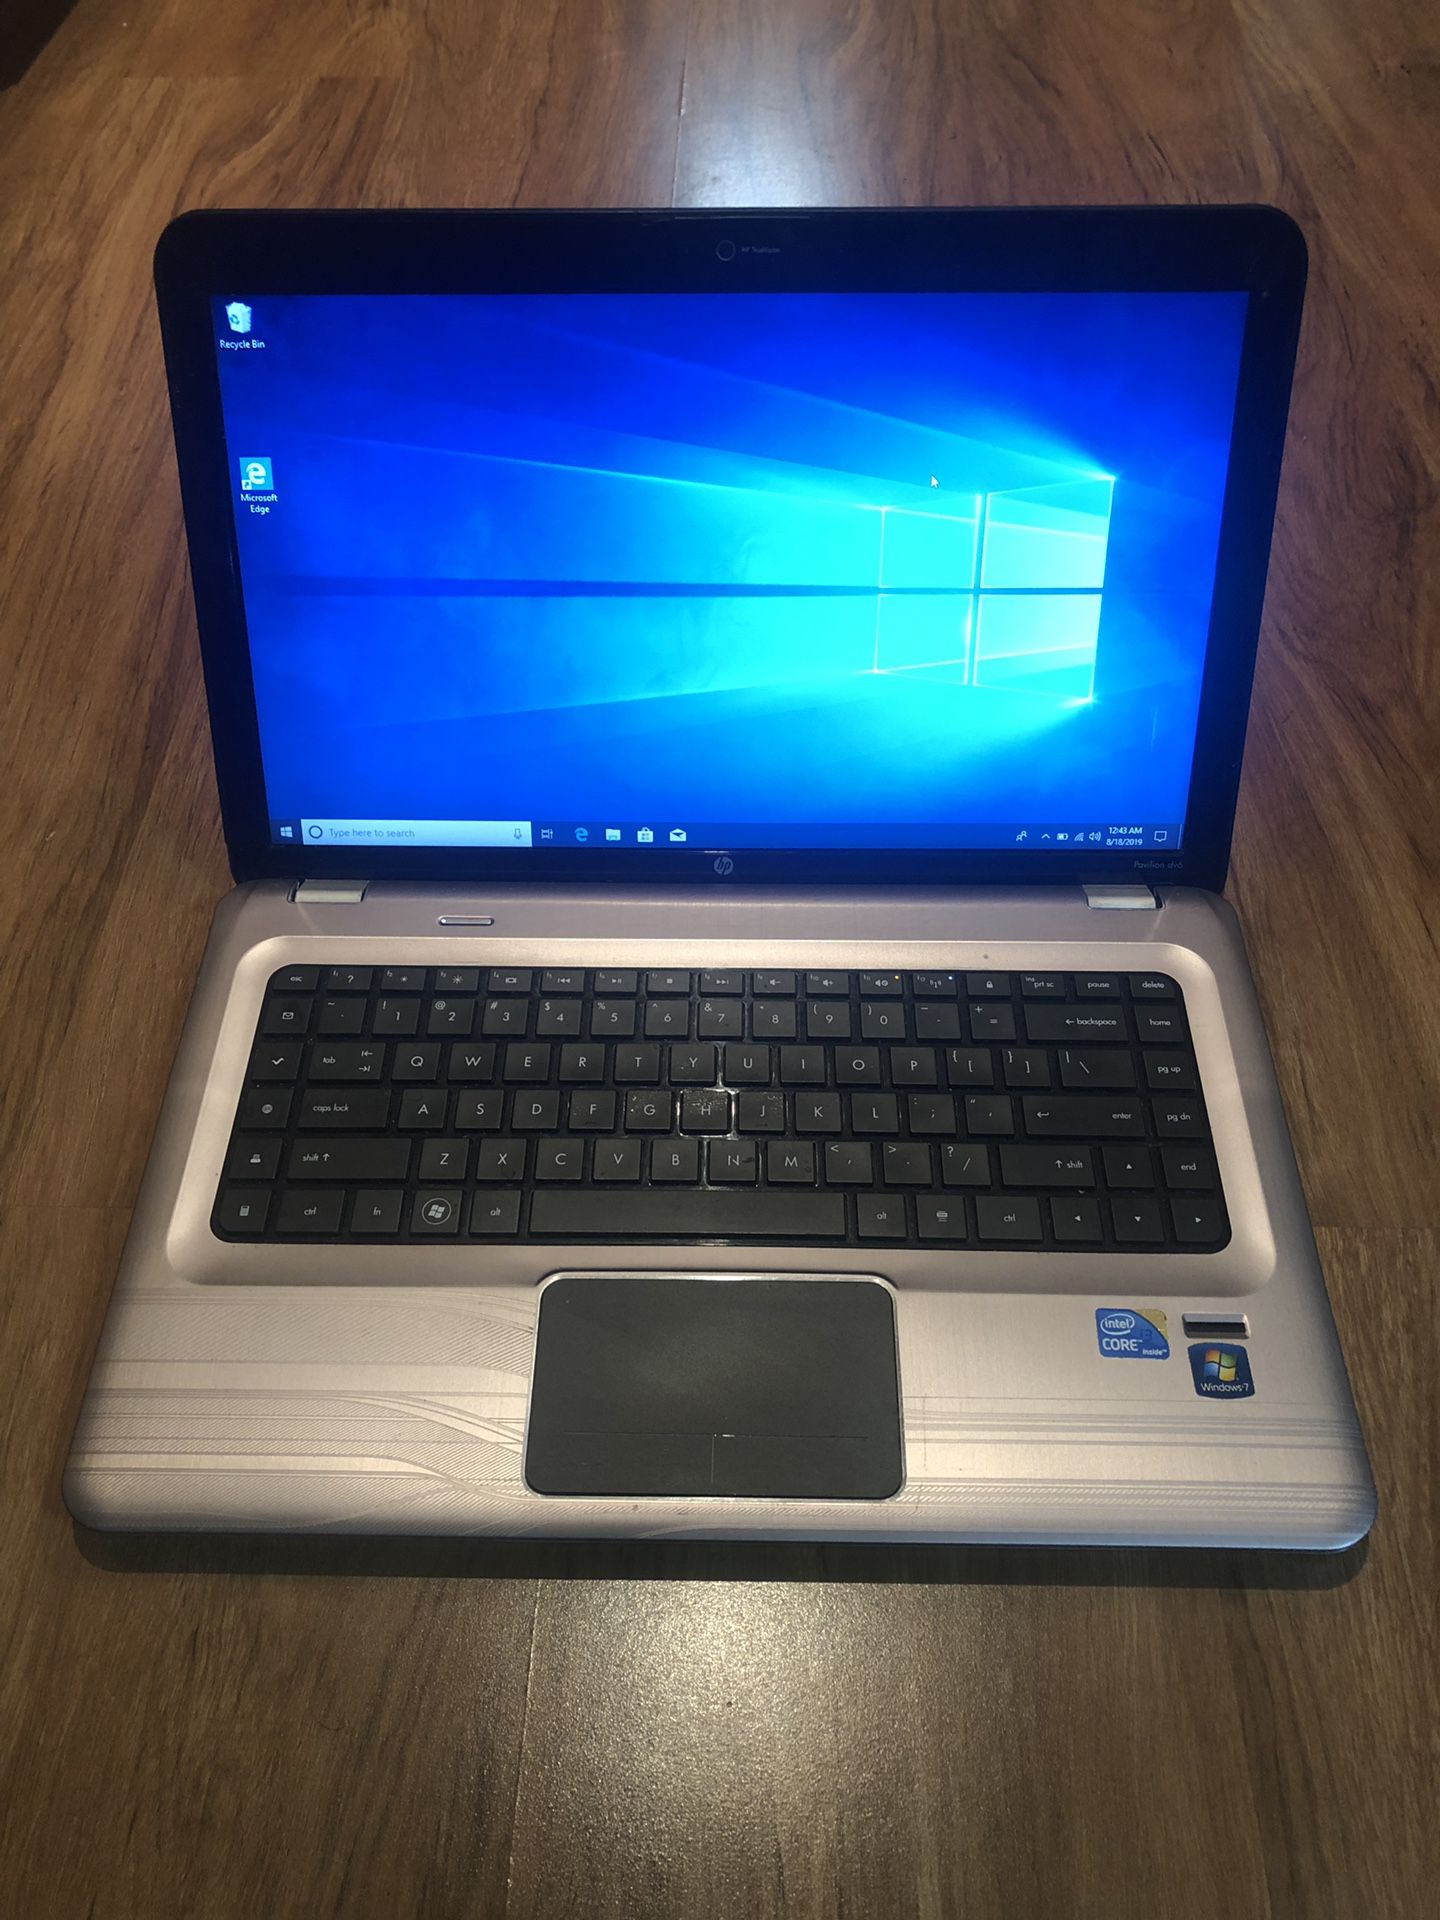 HP Pavilion dv6 core i3 4GB Ram 320GB Hard Drive 15.6 inch Windows 10 Pro Laptop with HDMI output & charger in Excellent Working condition!!!!!!!